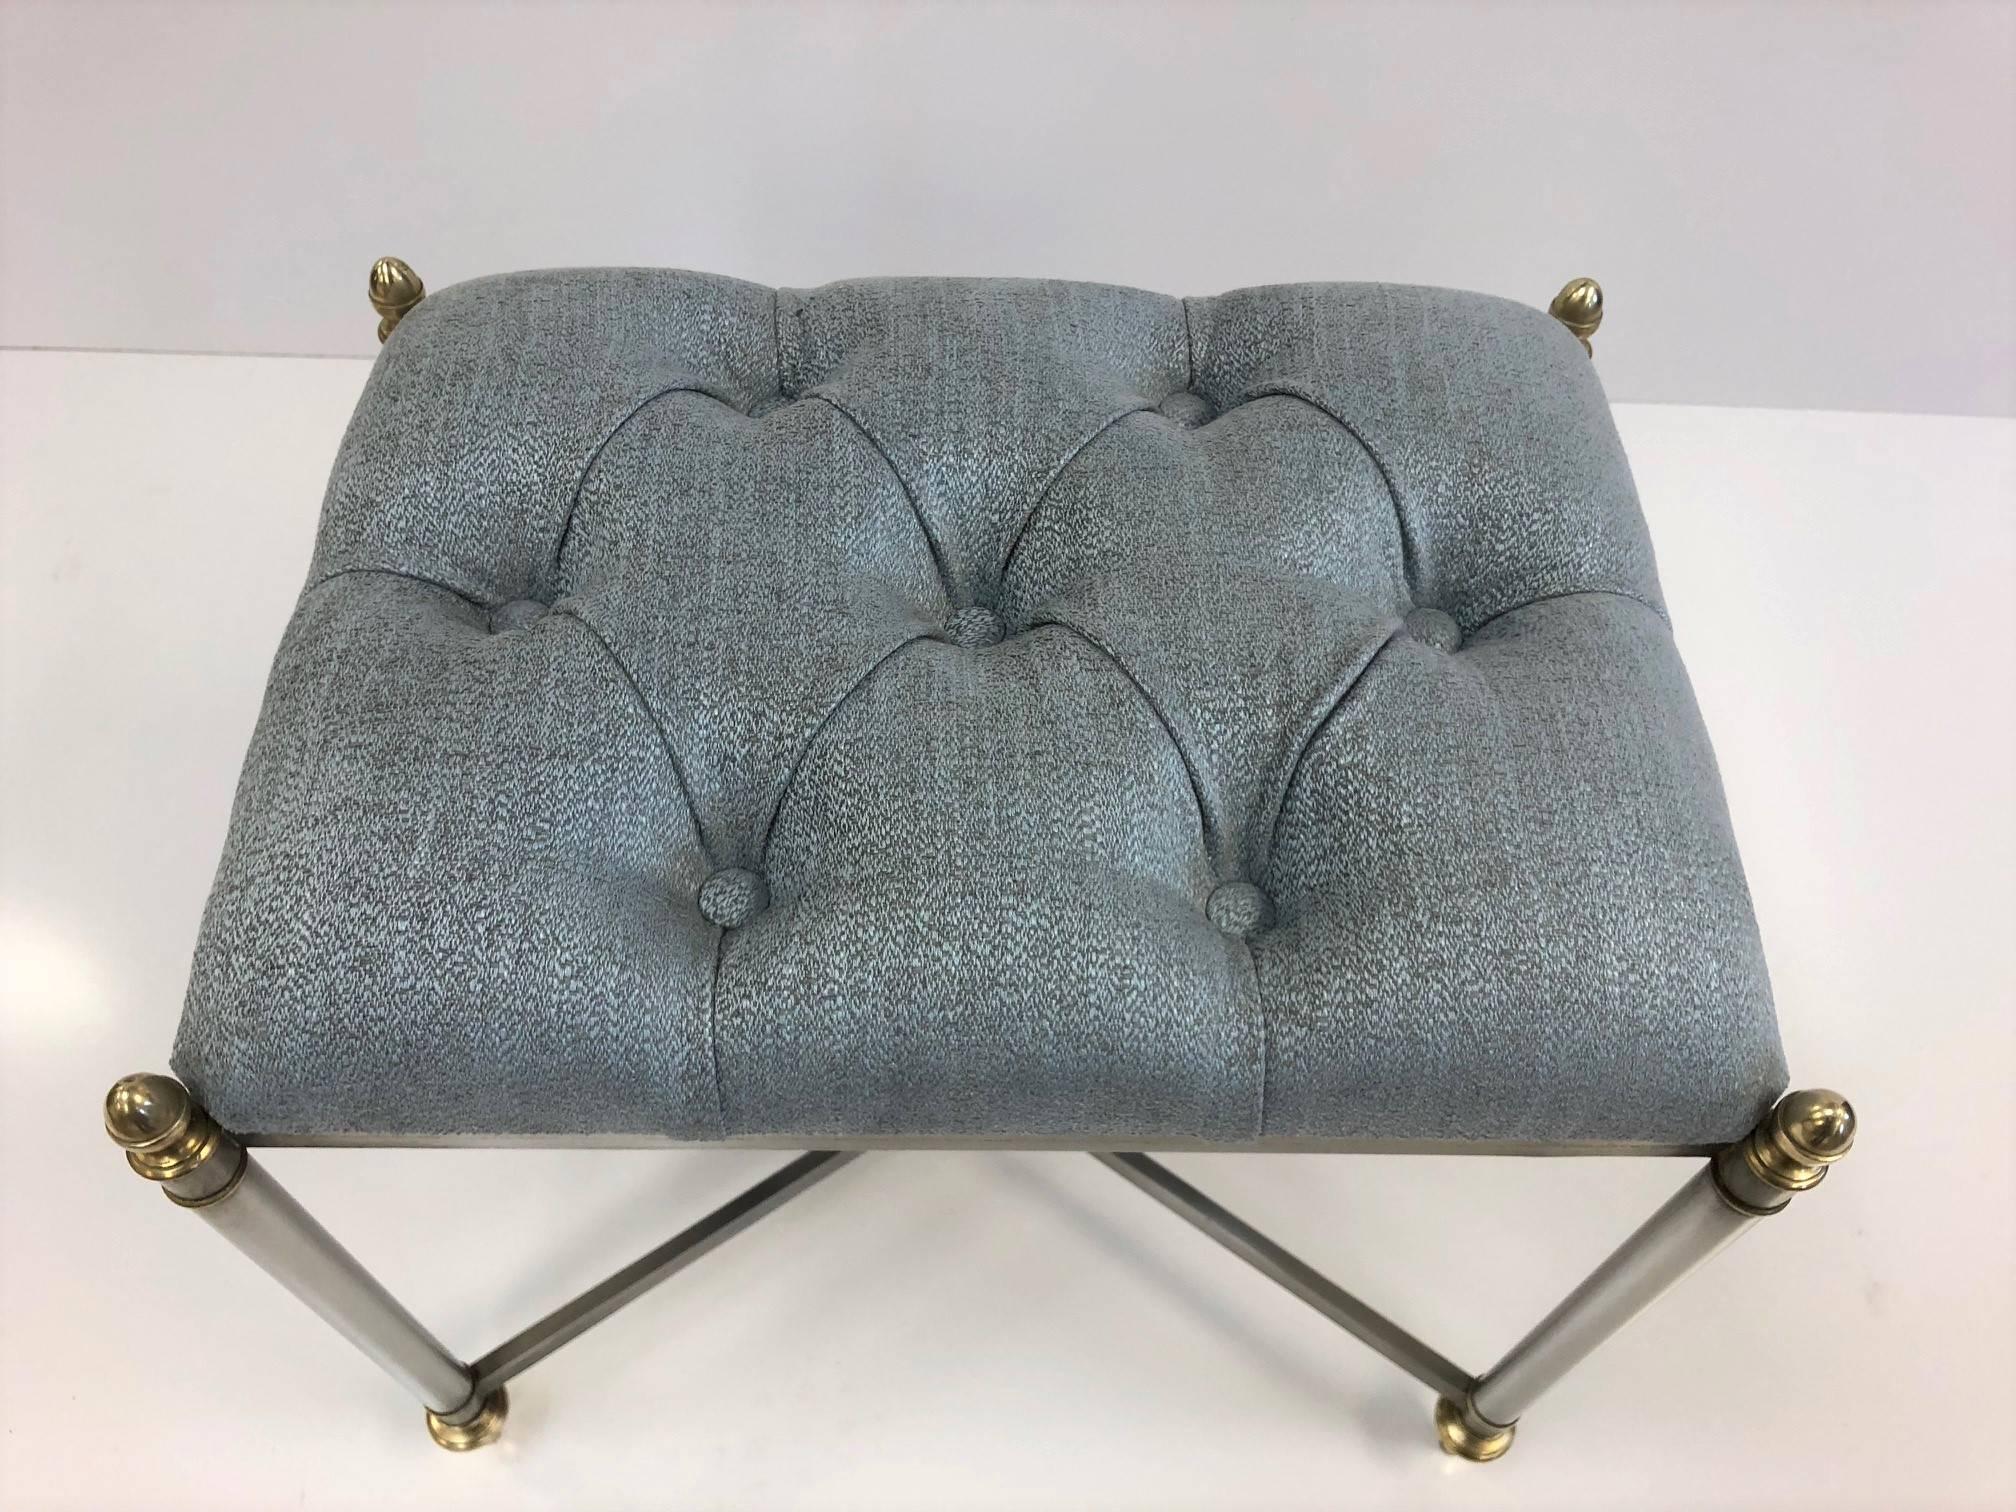 Maison Jansen bronze and steel tufted upholstered bench.